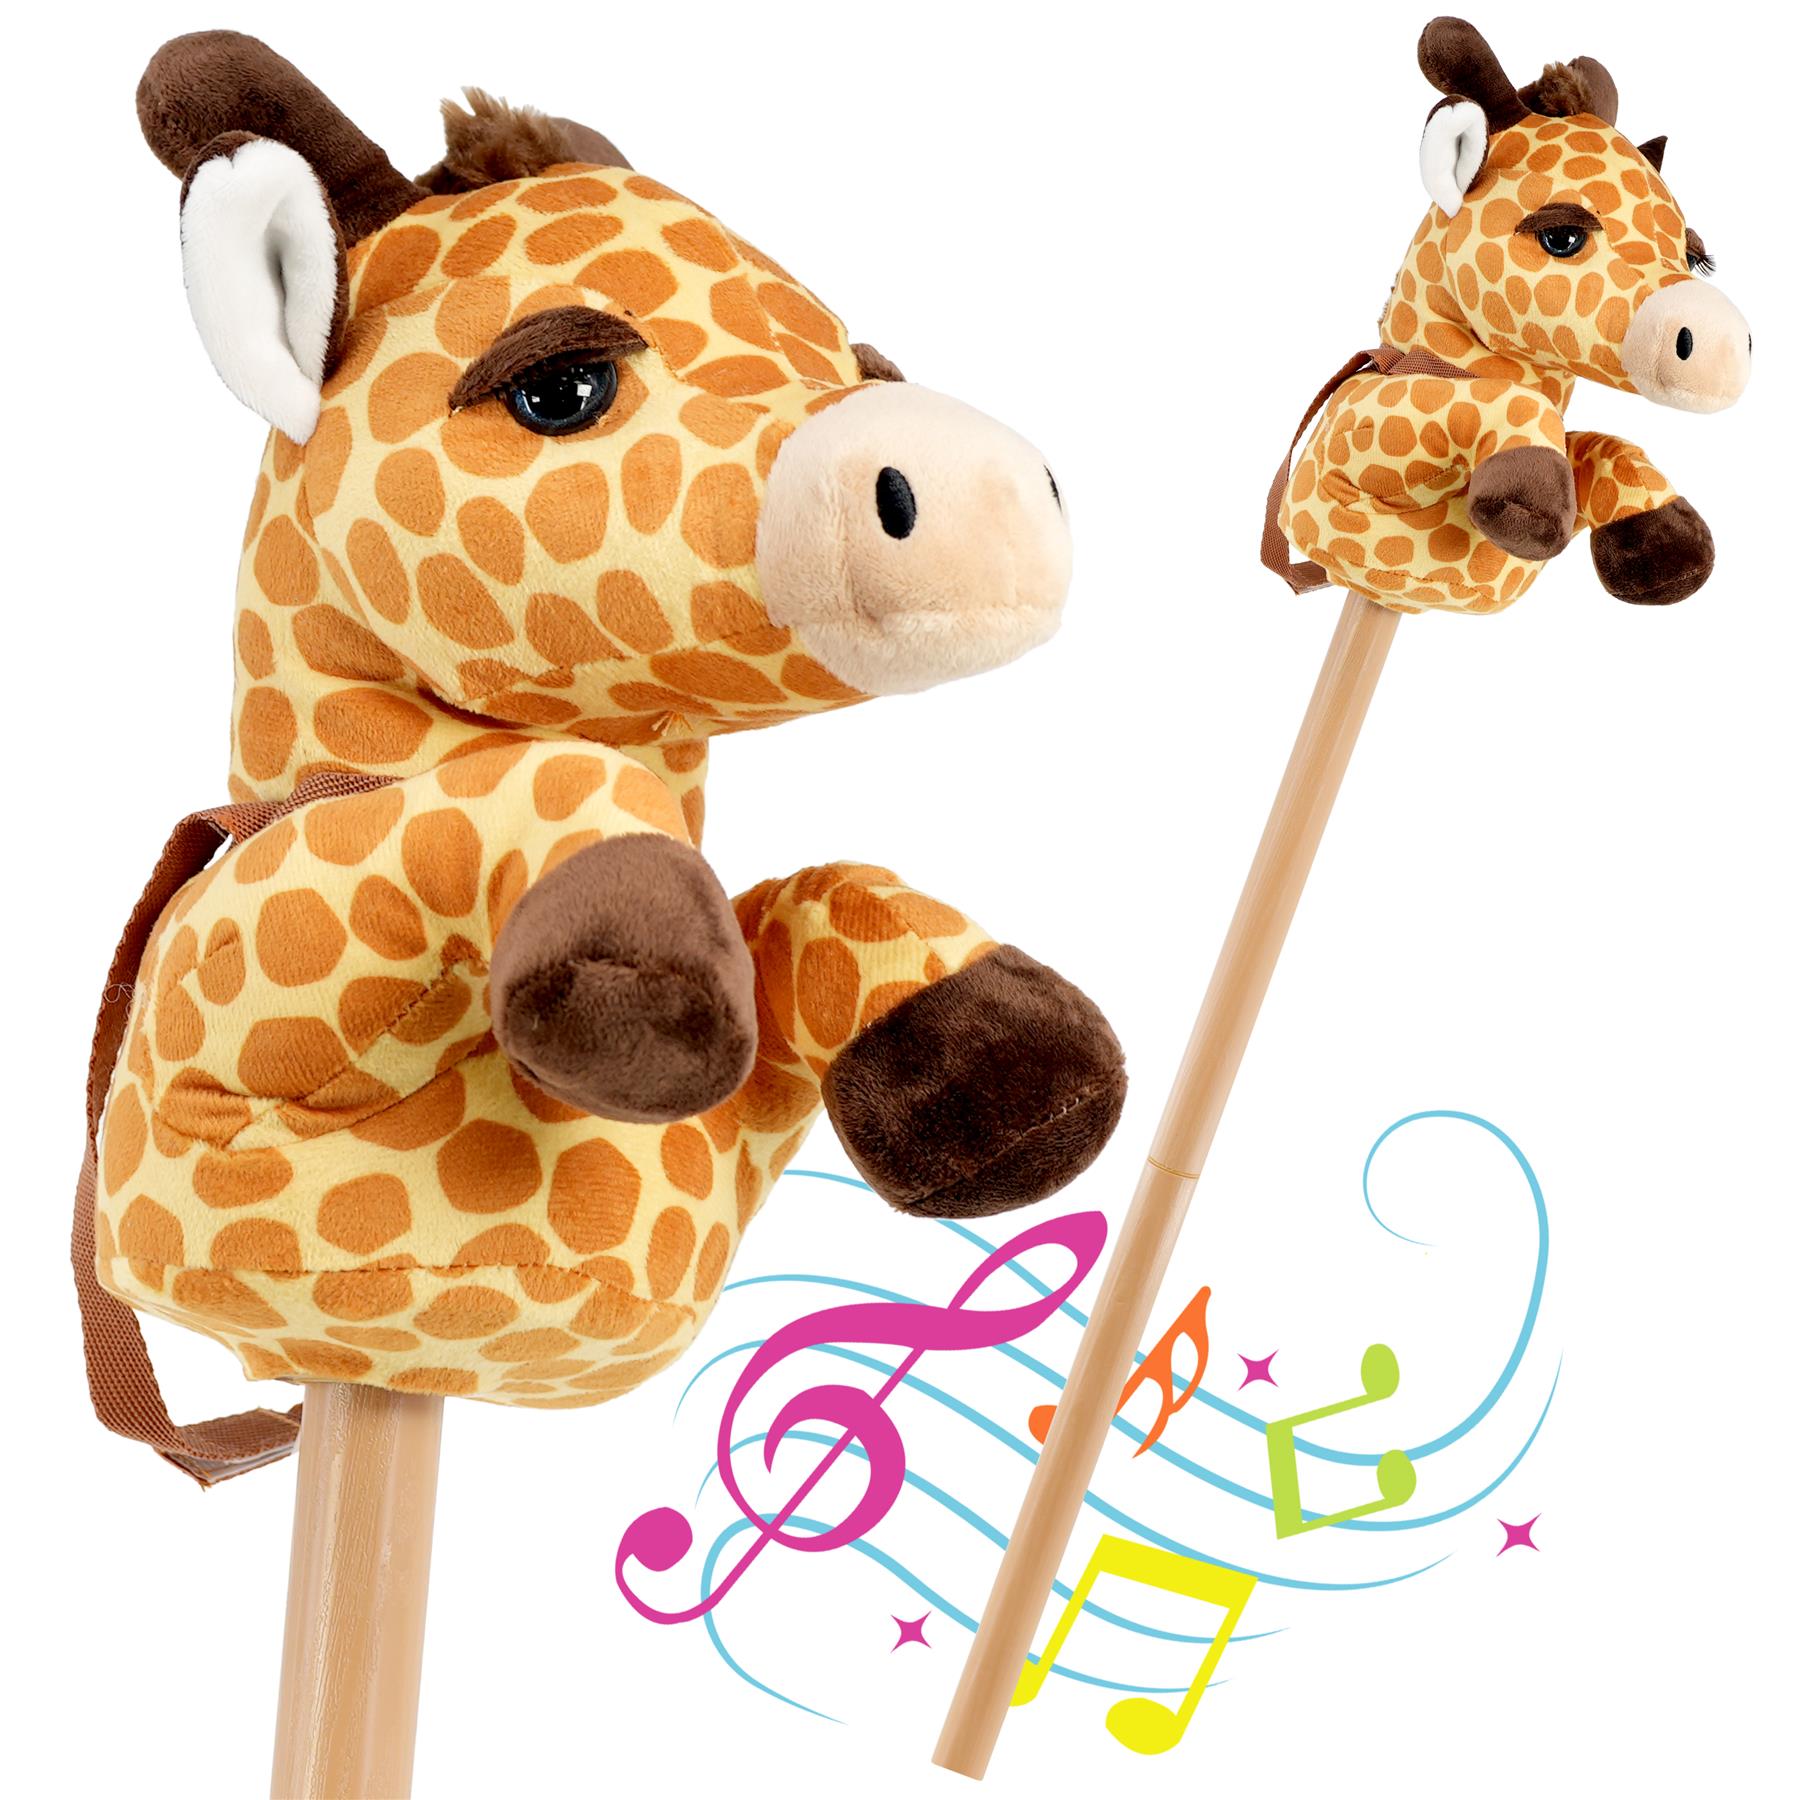 The Magic Toy Shop Kids Hobby Horse Giraffe with Sounds